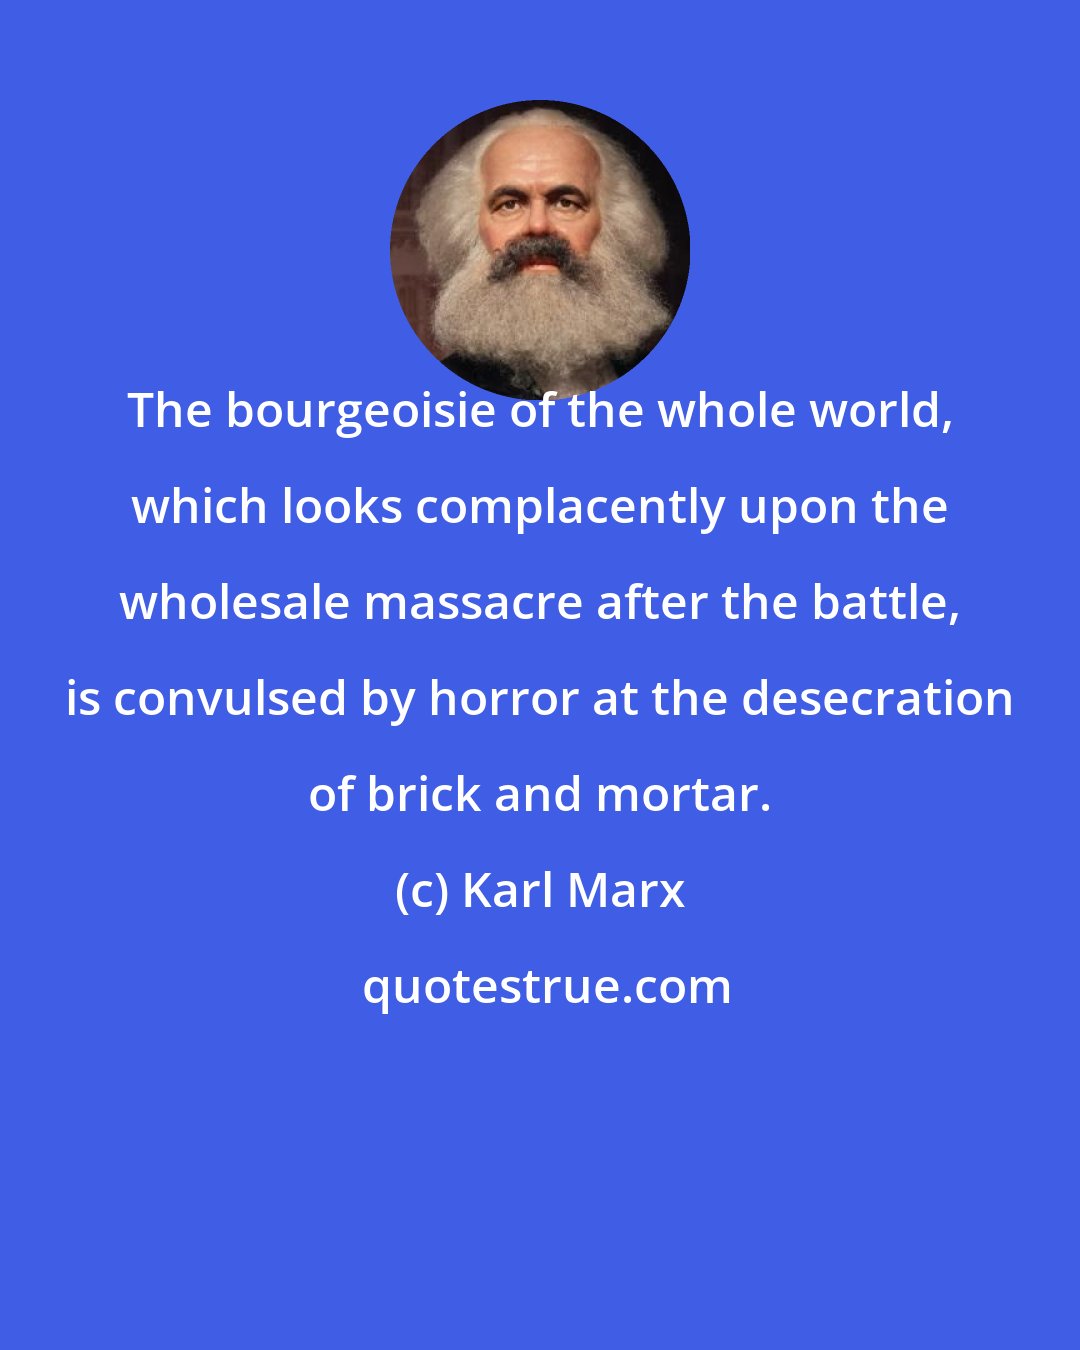 Karl Marx: The bourgeoisie of the whole world, which looks complacently upon the wholesale massacre after the battle, is convulsed by horror at the desecration of brick and mortar.